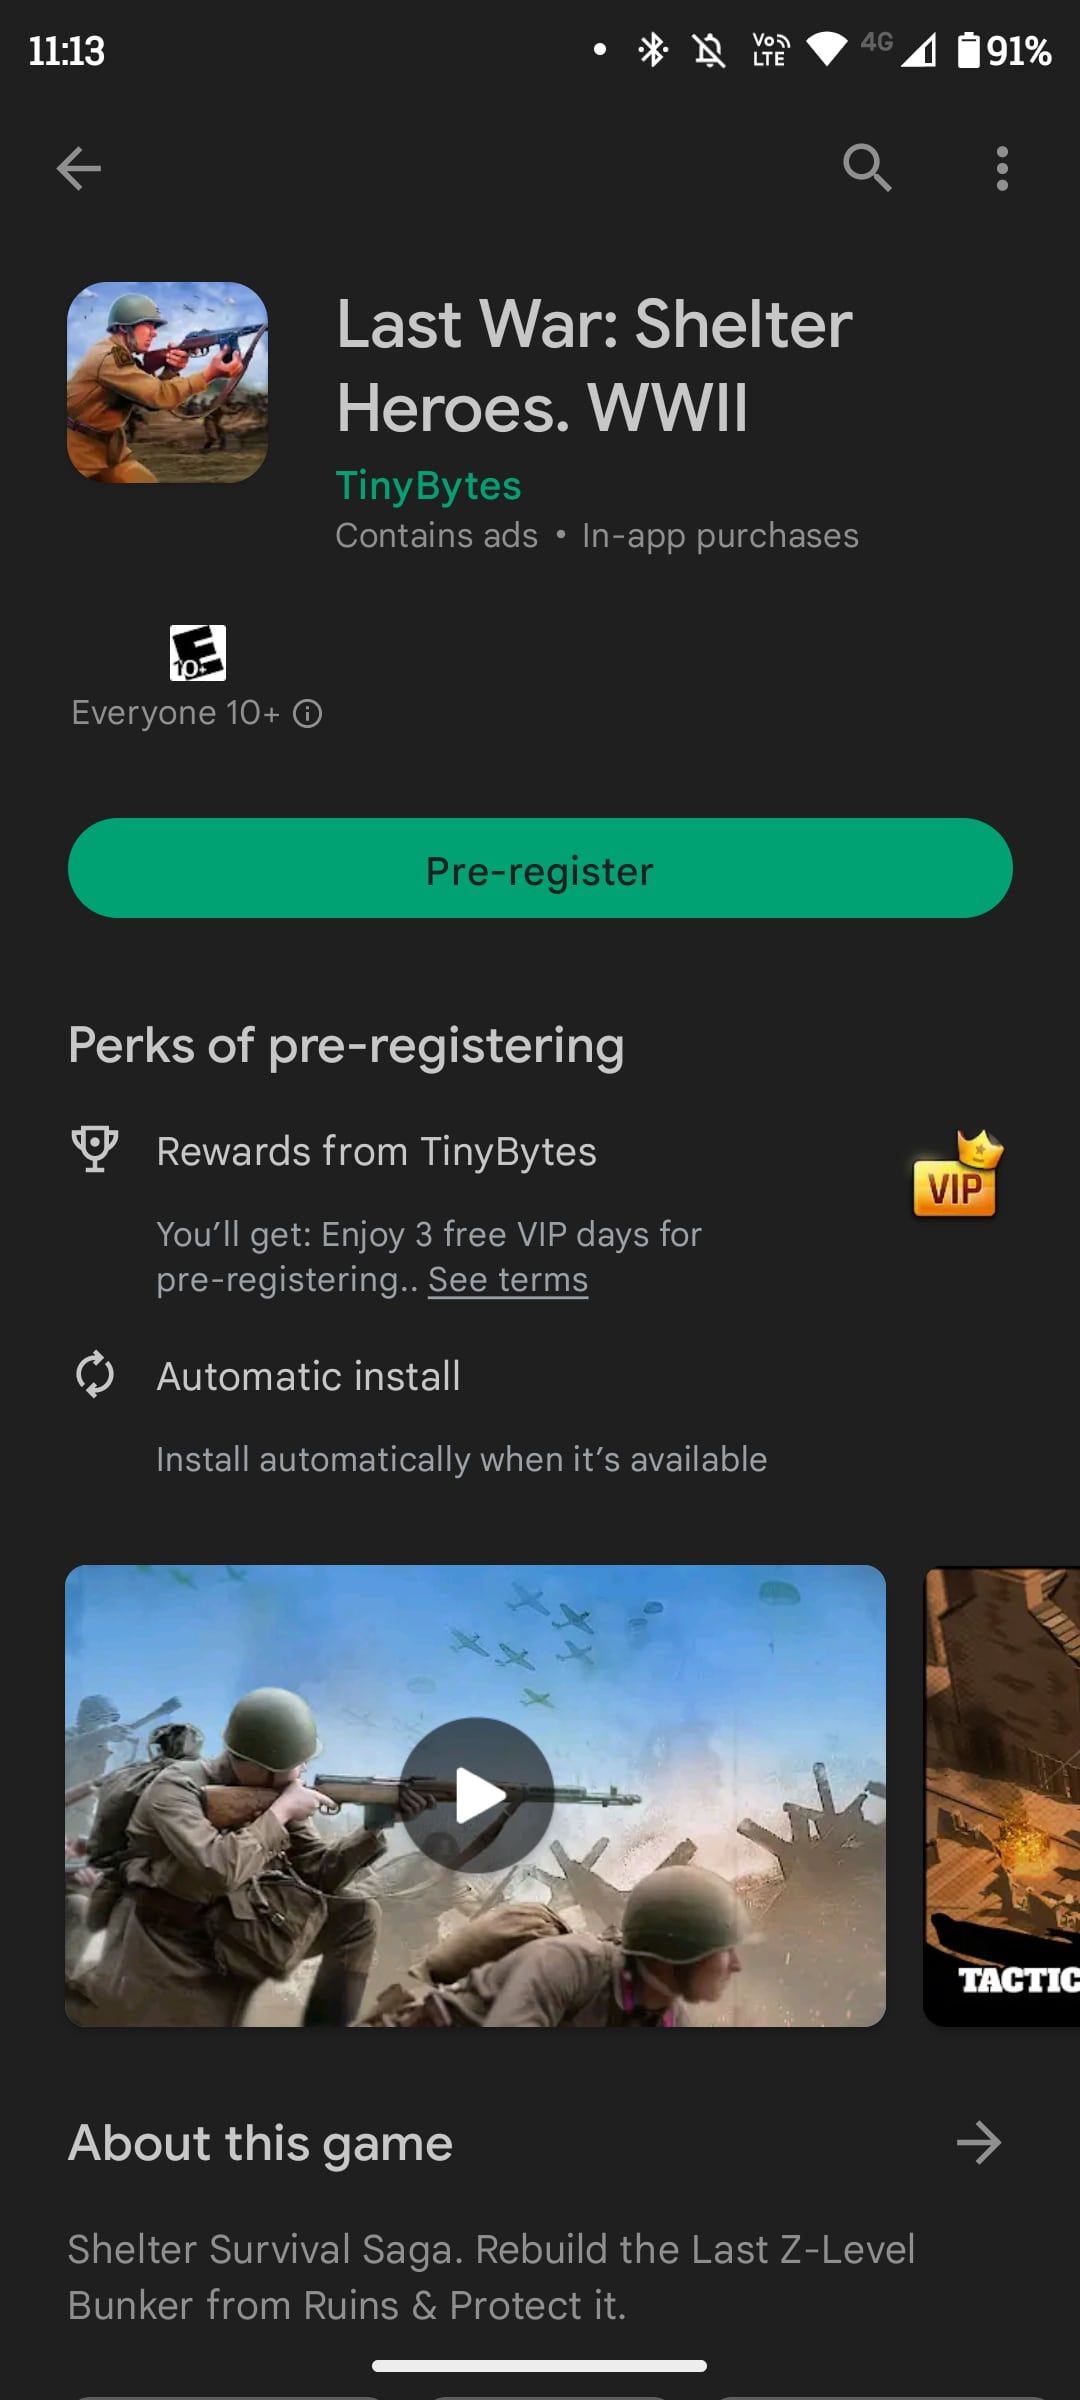 Last War Pre-register app store page with perks